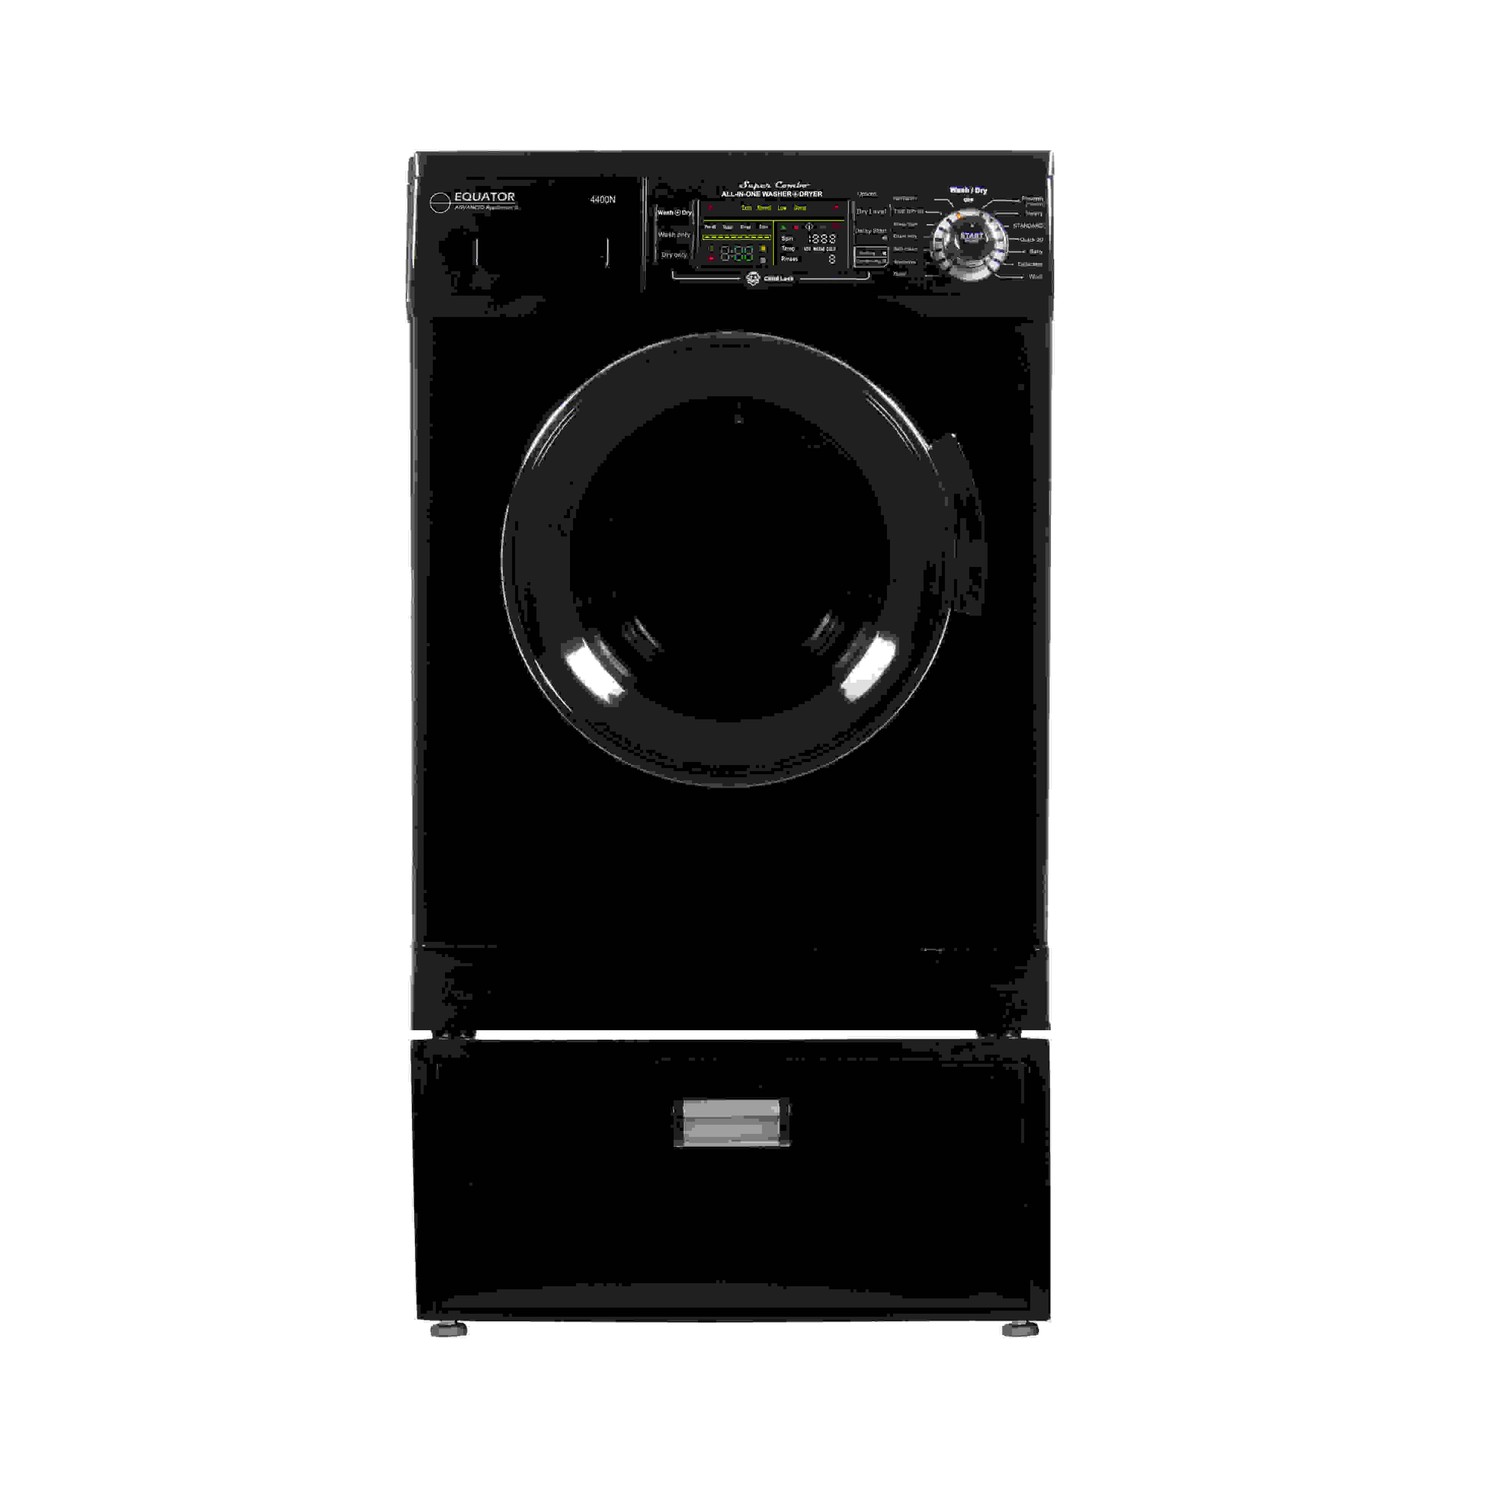 Equator Compact 13 lbs Combination Washer DryerVented/Ventless Dry + Laundry Pedestal with Drawer